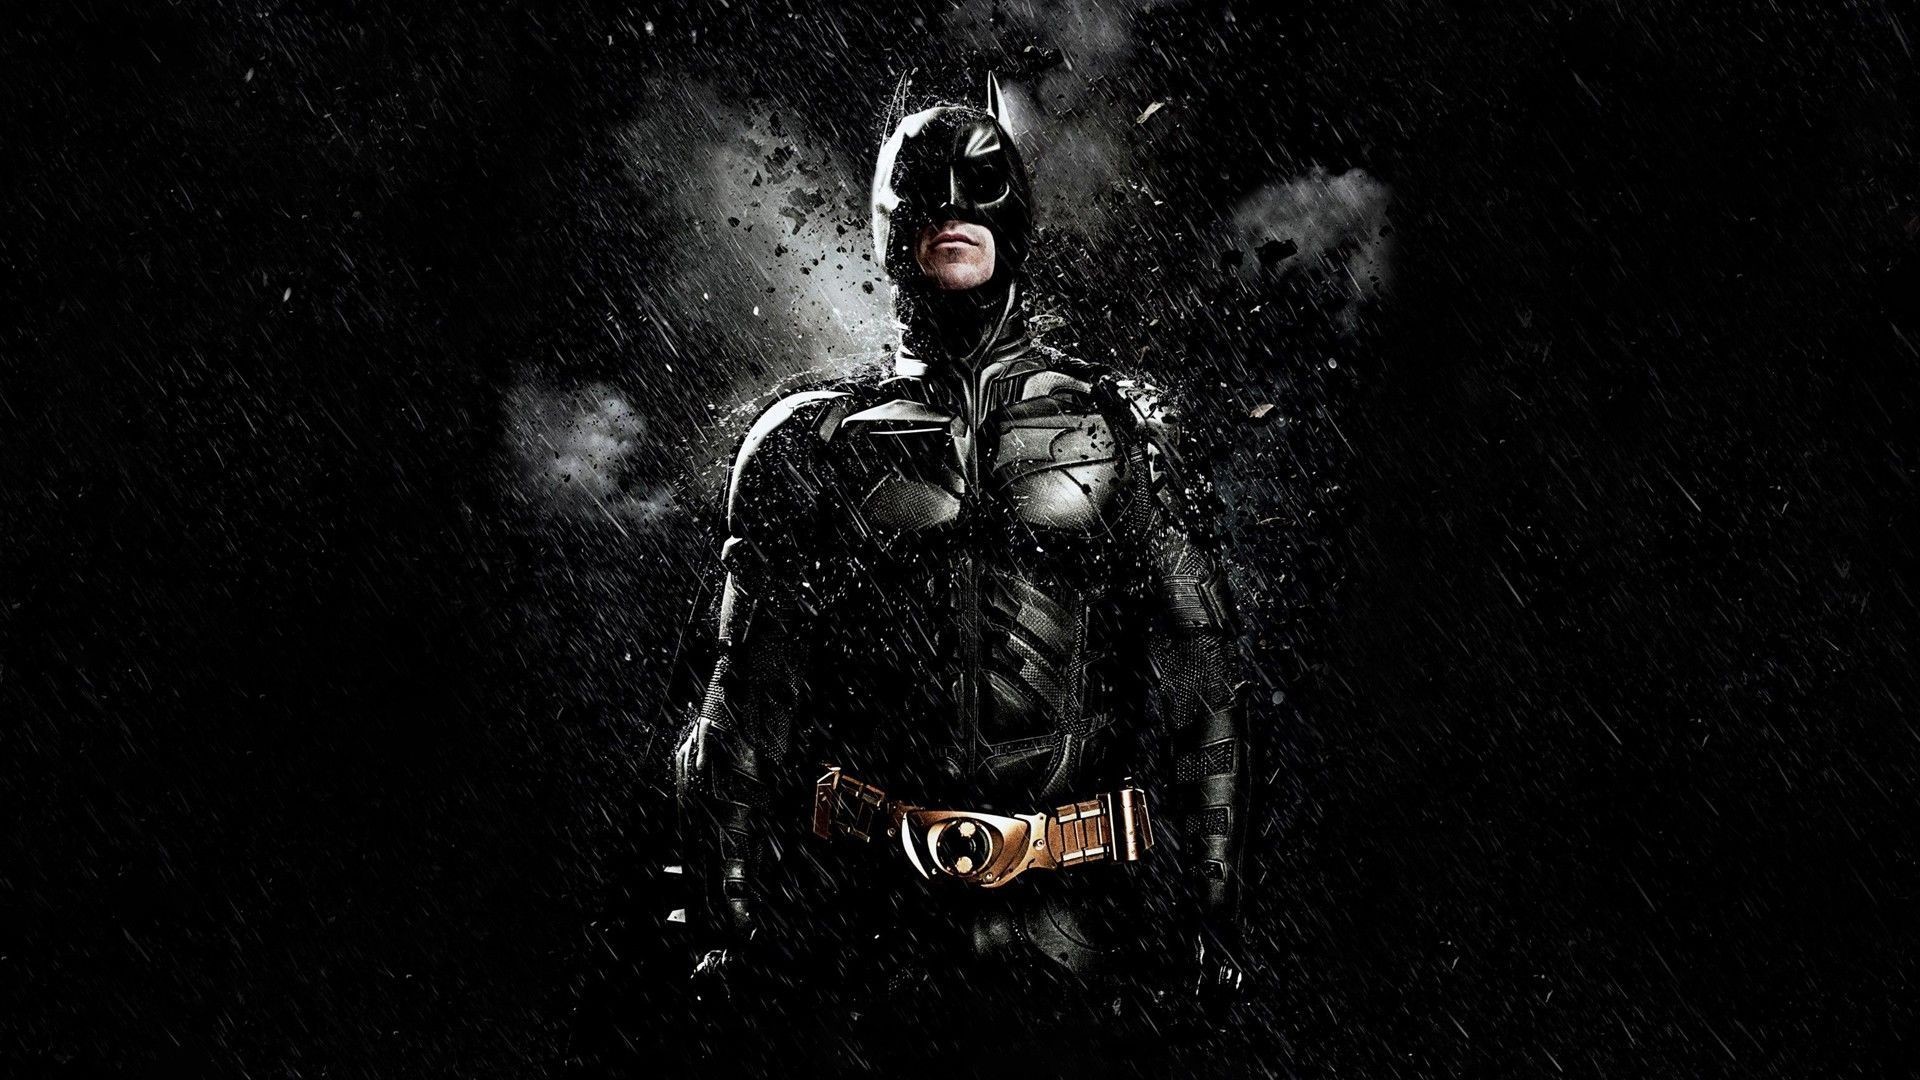 1920x1080 ... 46 Batman Gallery of Wallpapers | Free Android ...